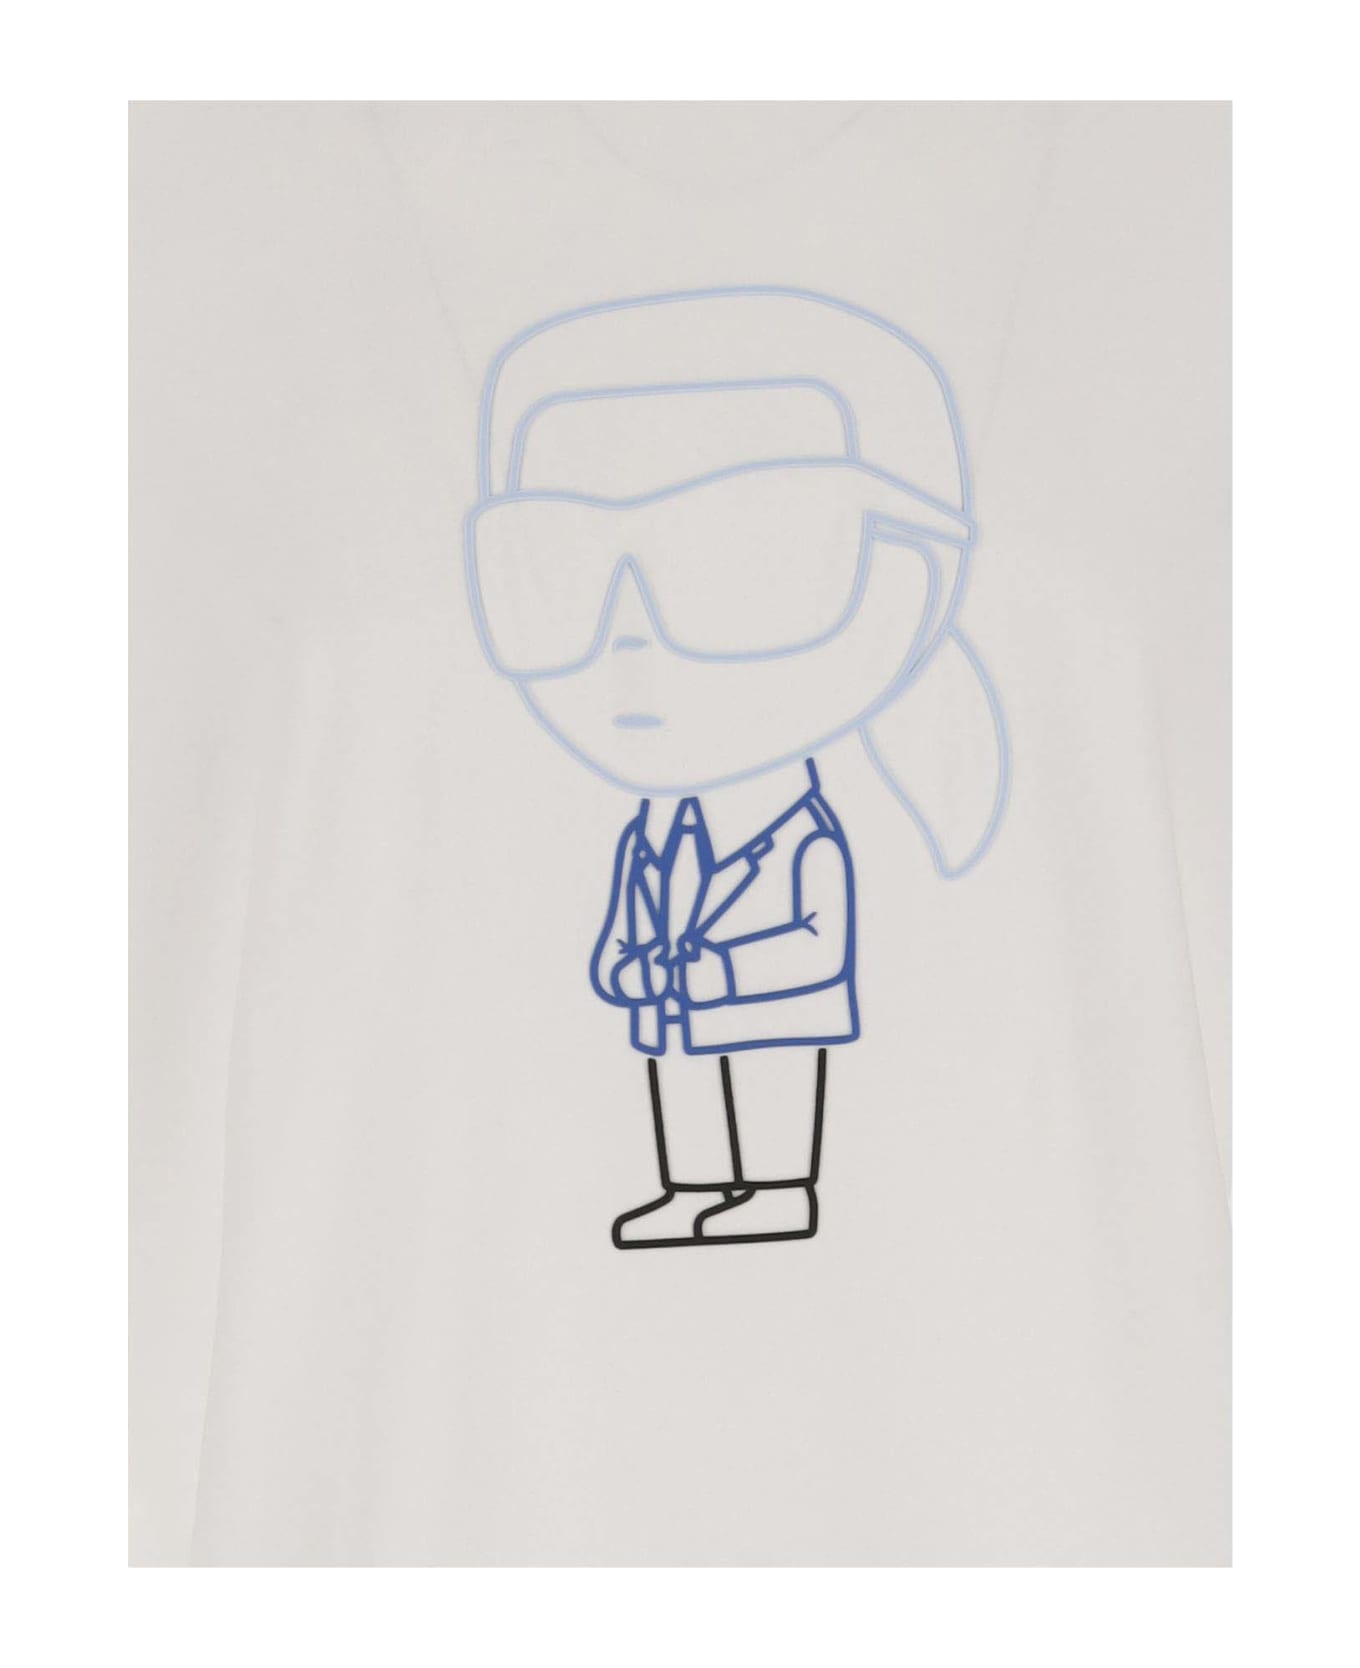 Karl Lagerfeld Stretch Cotton T-shirt With Logo - White